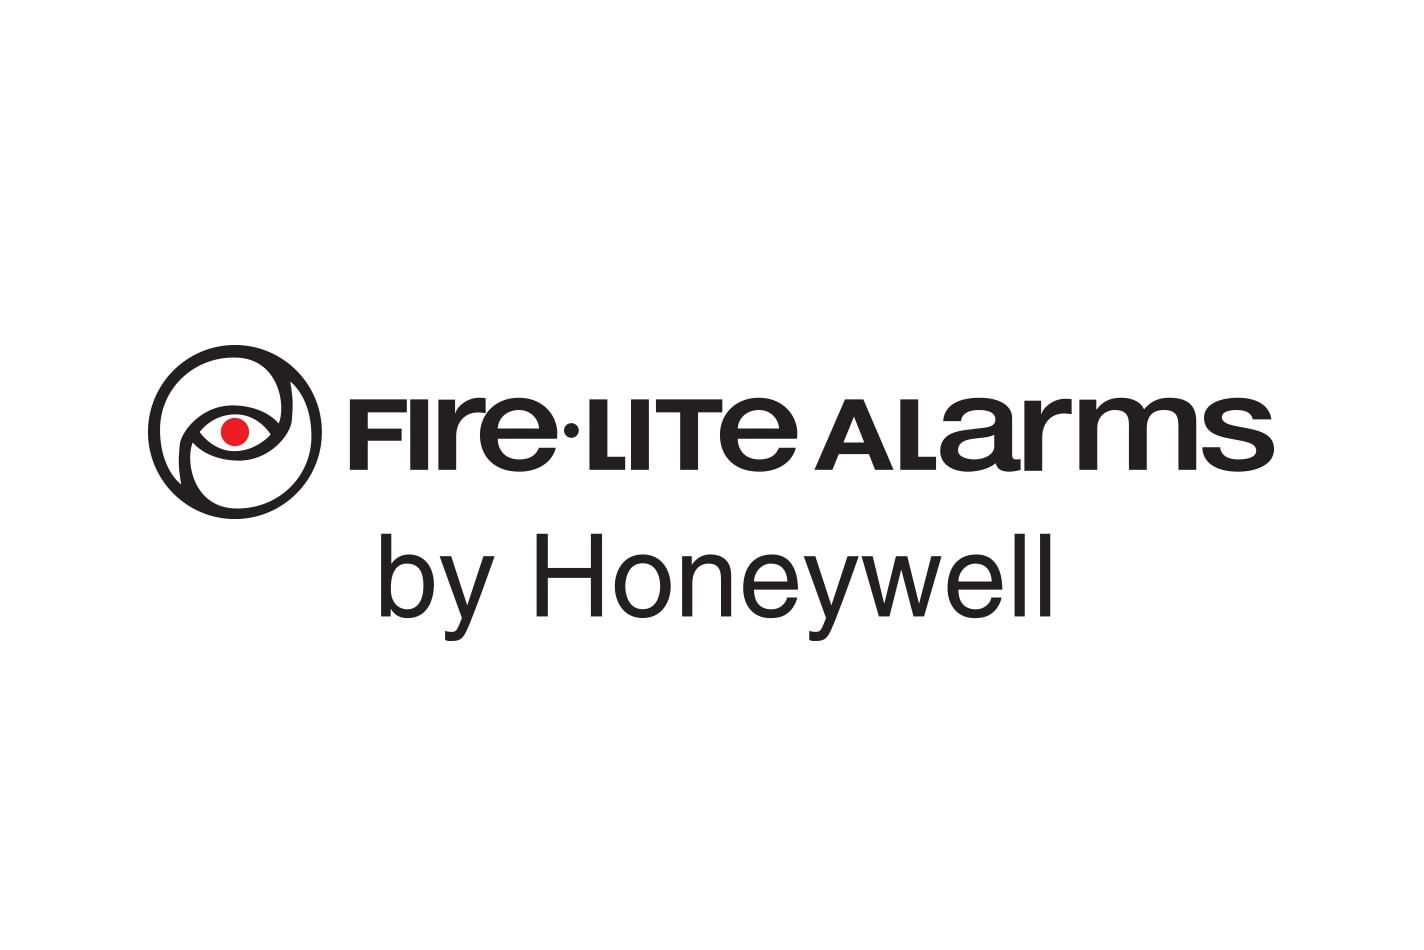 Fire-Lite Alarms by Honeywell